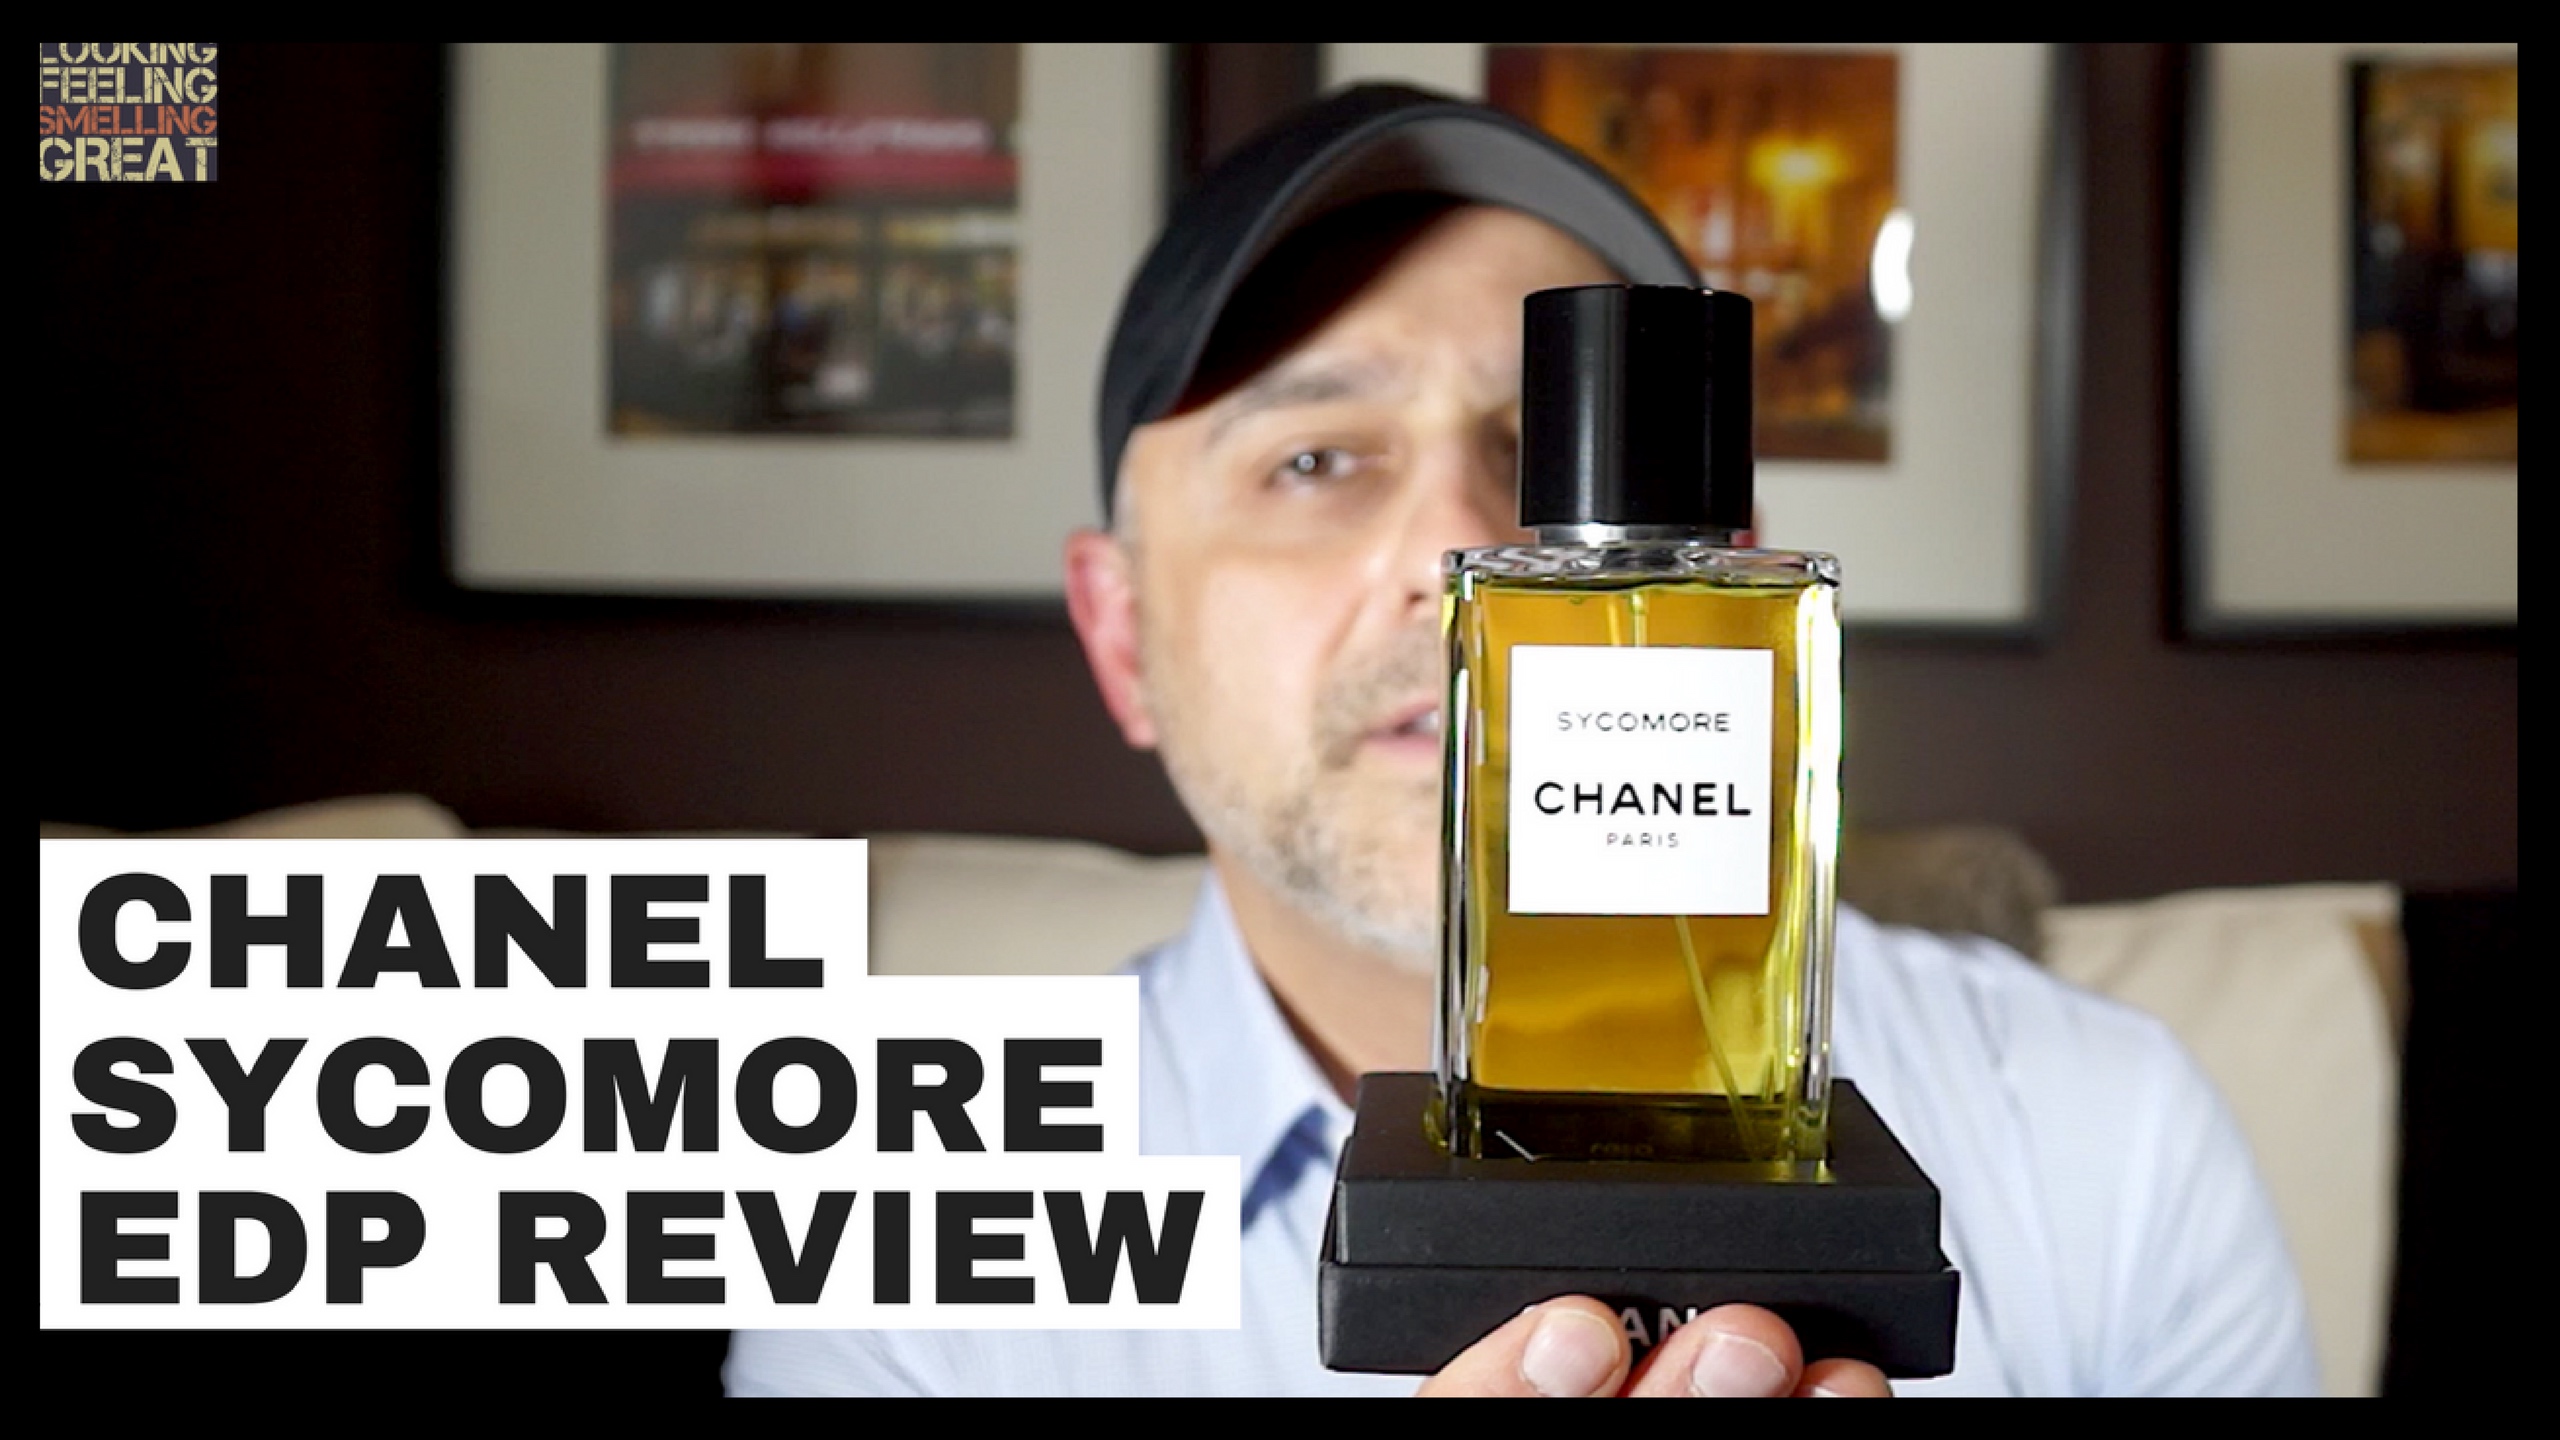 Chanel Sycomore EDP Review - Looking Feeling Smelling Great